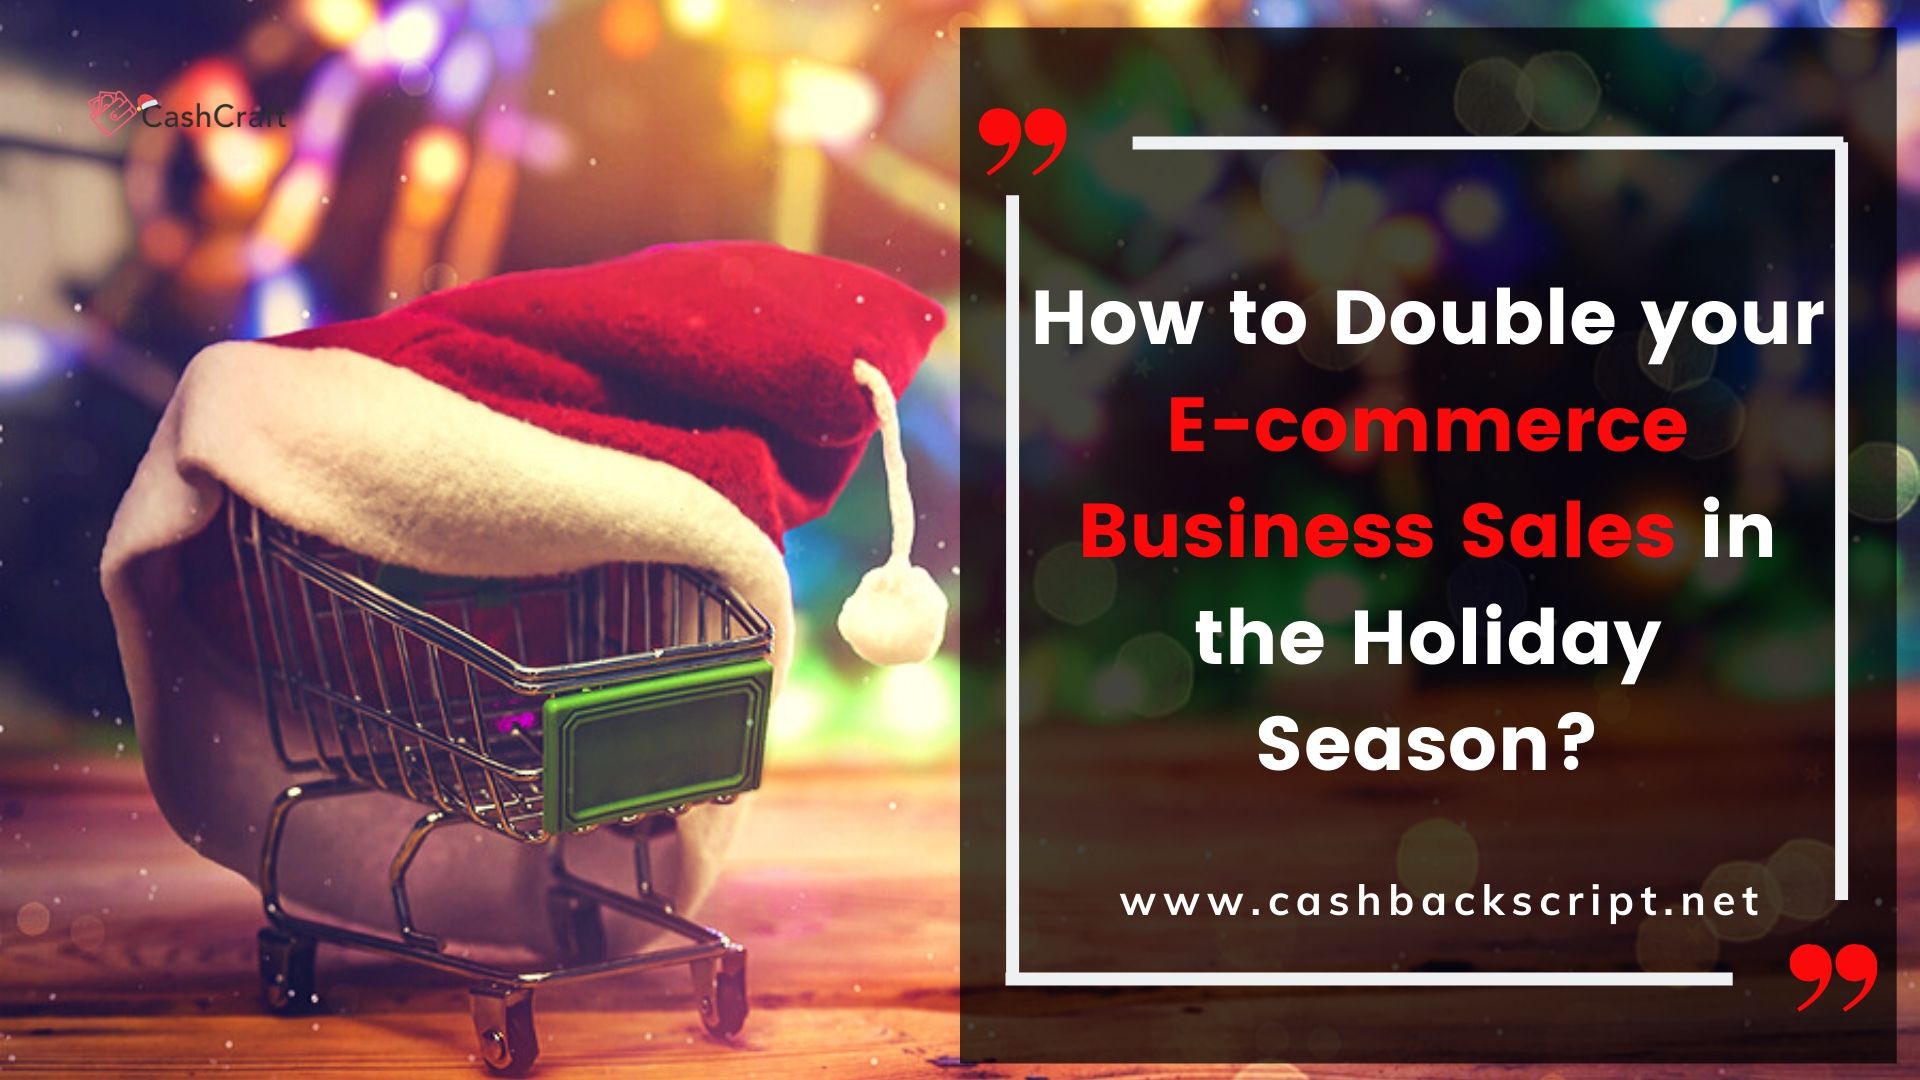 How to Double your E-commerce Business Sales in the Holiday Season?